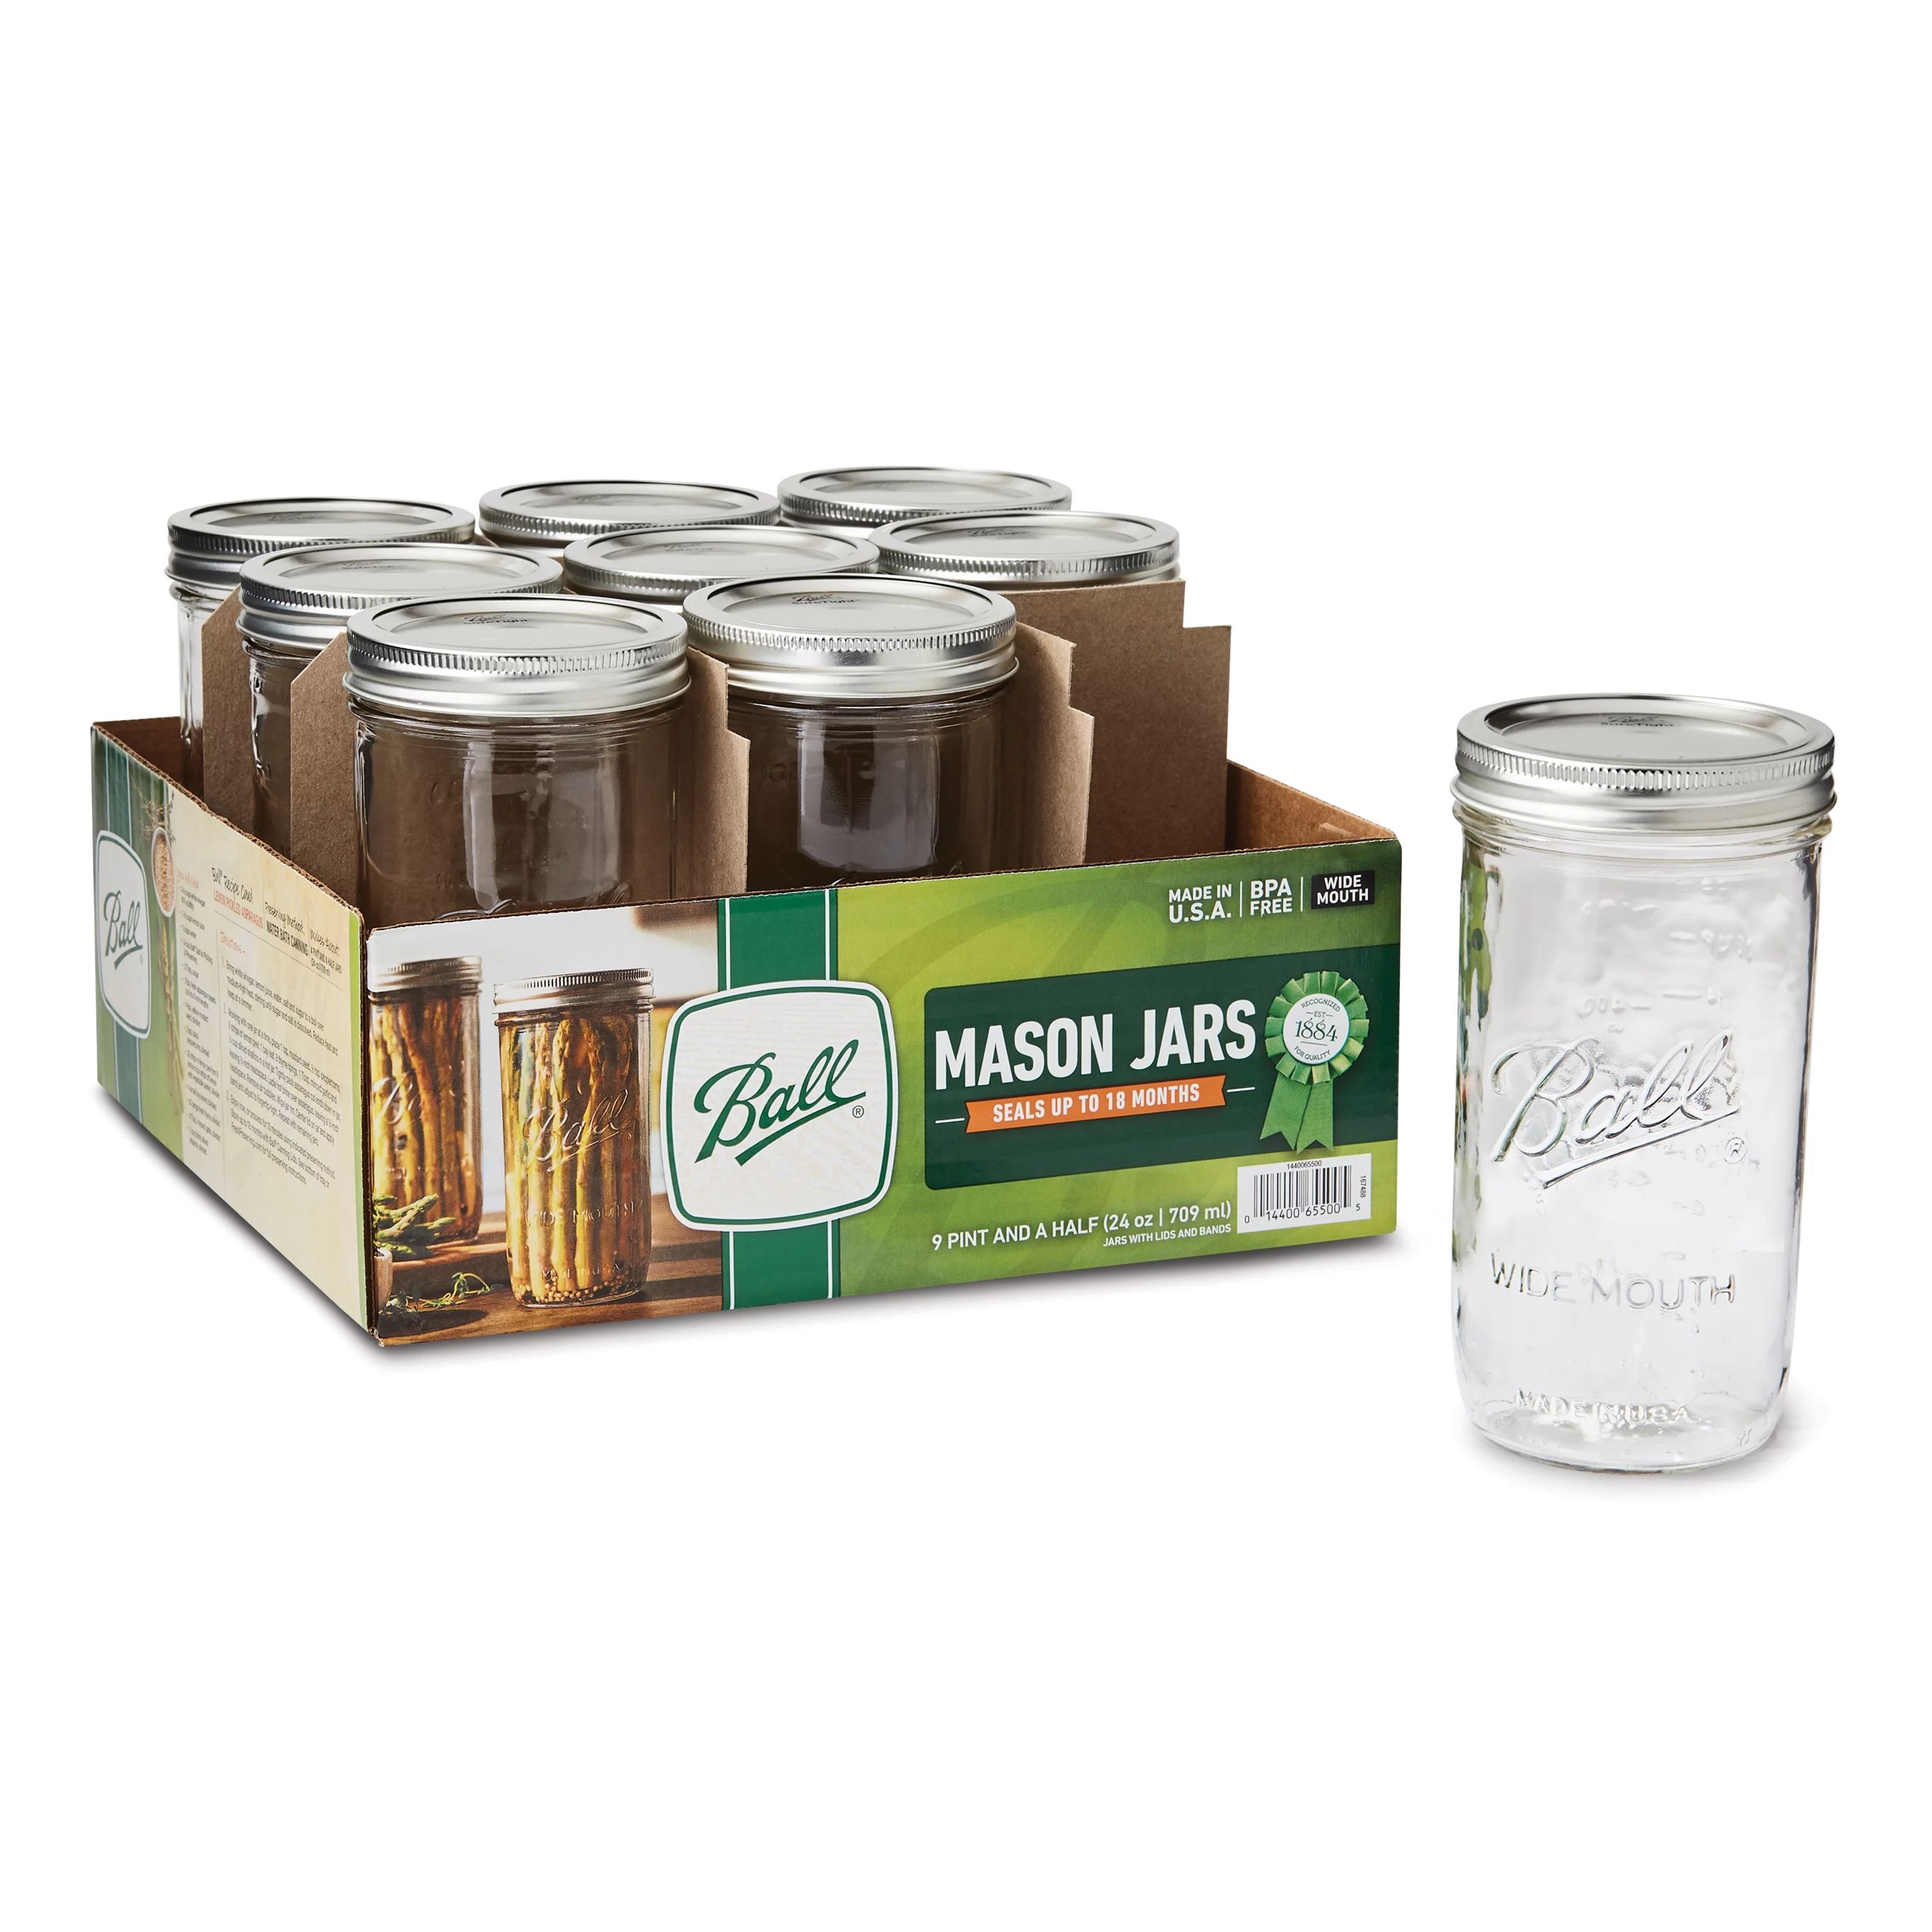 Ball, Glass Mason Jars with Lids & Bands, Wide Mouth, 24 oz, 9 Count | Walmart (US)